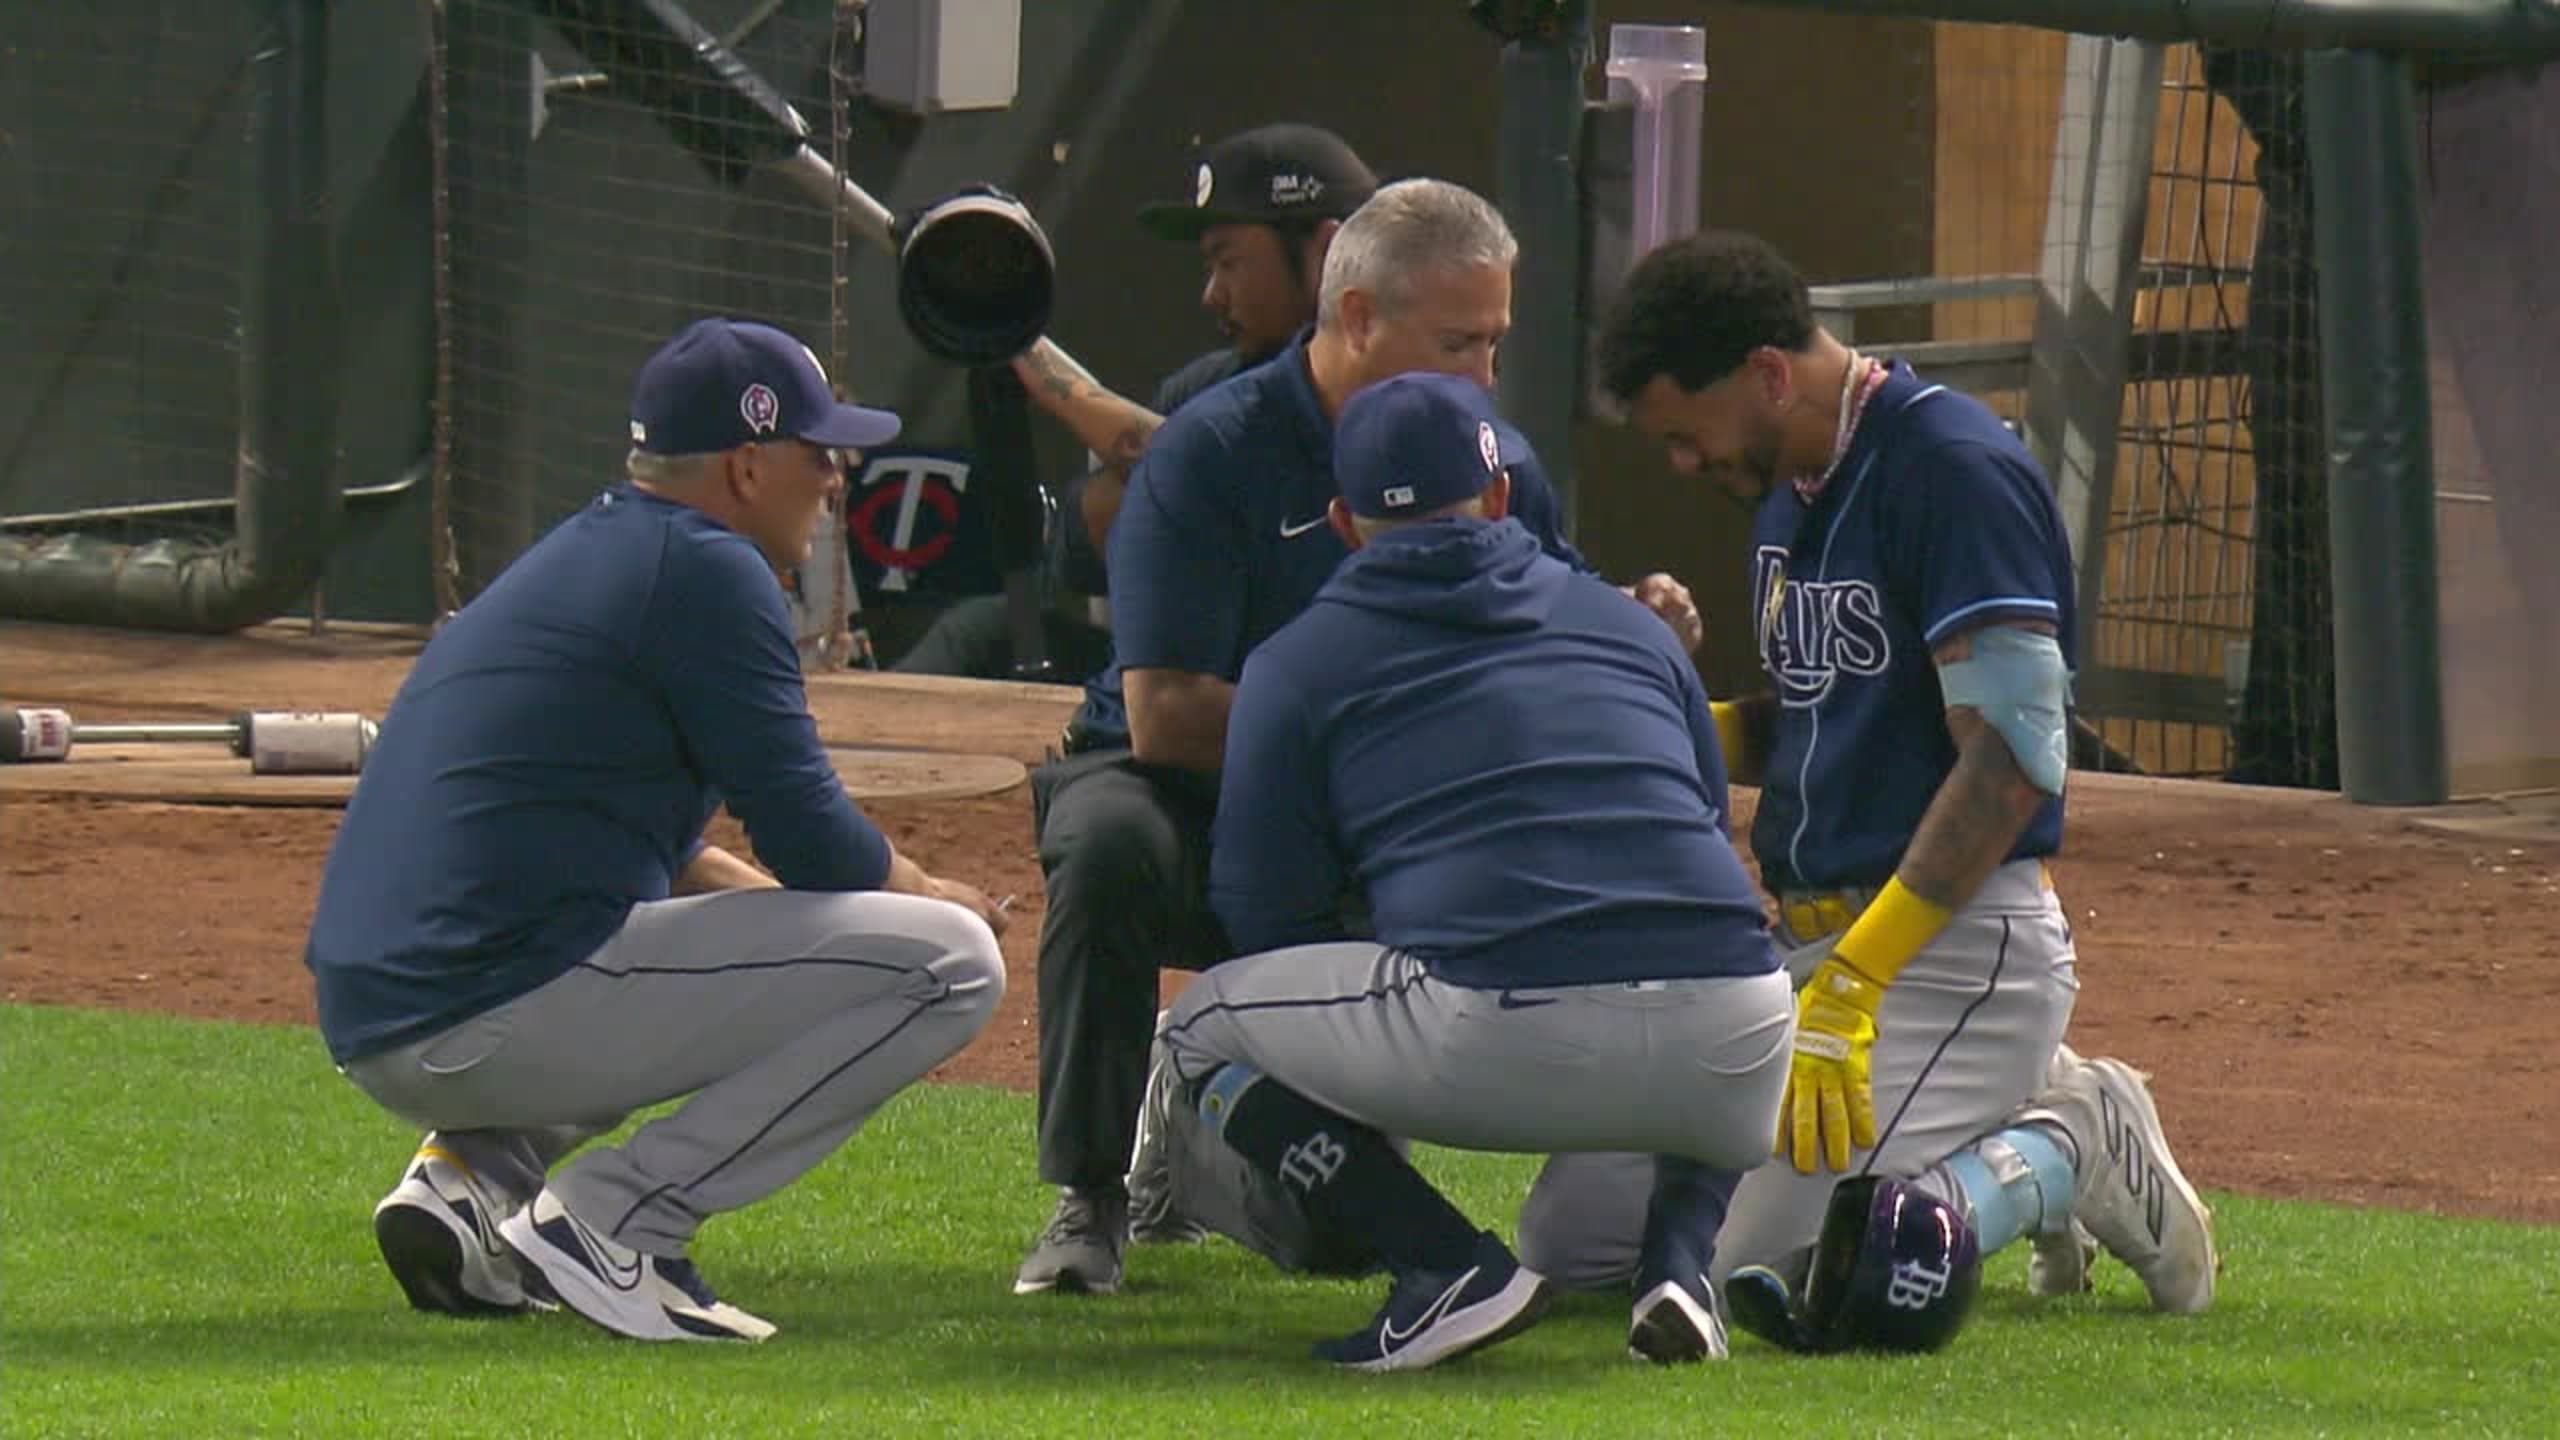 Jose Siri injury: Rays center fielder suffers fractured right hand on  hit-by-pitch vs. Twins 